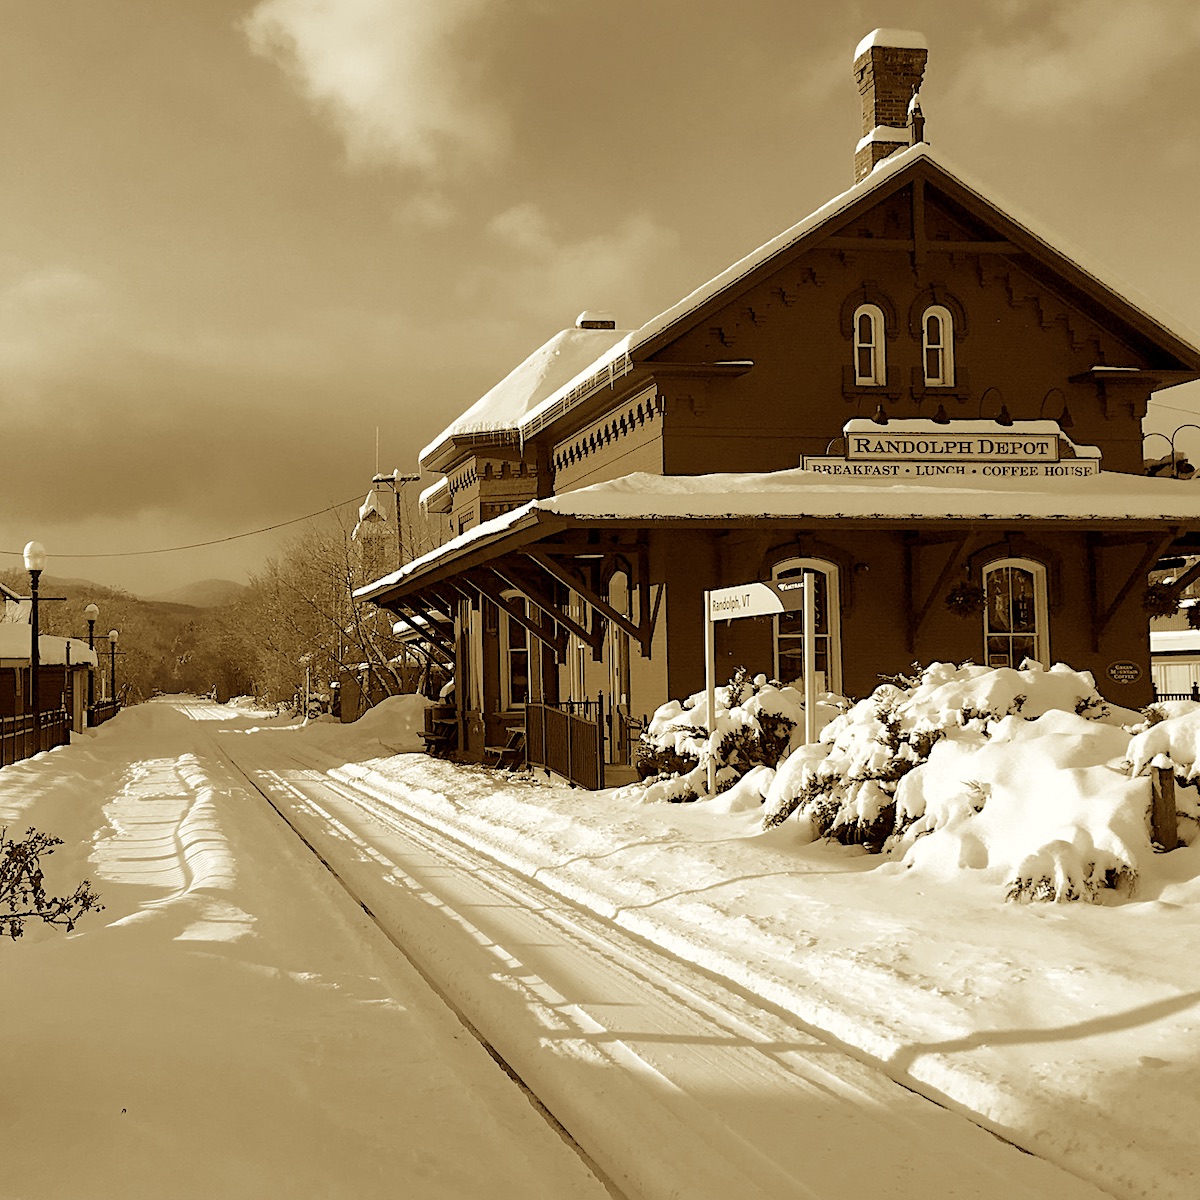 An older photo of the train depot building.